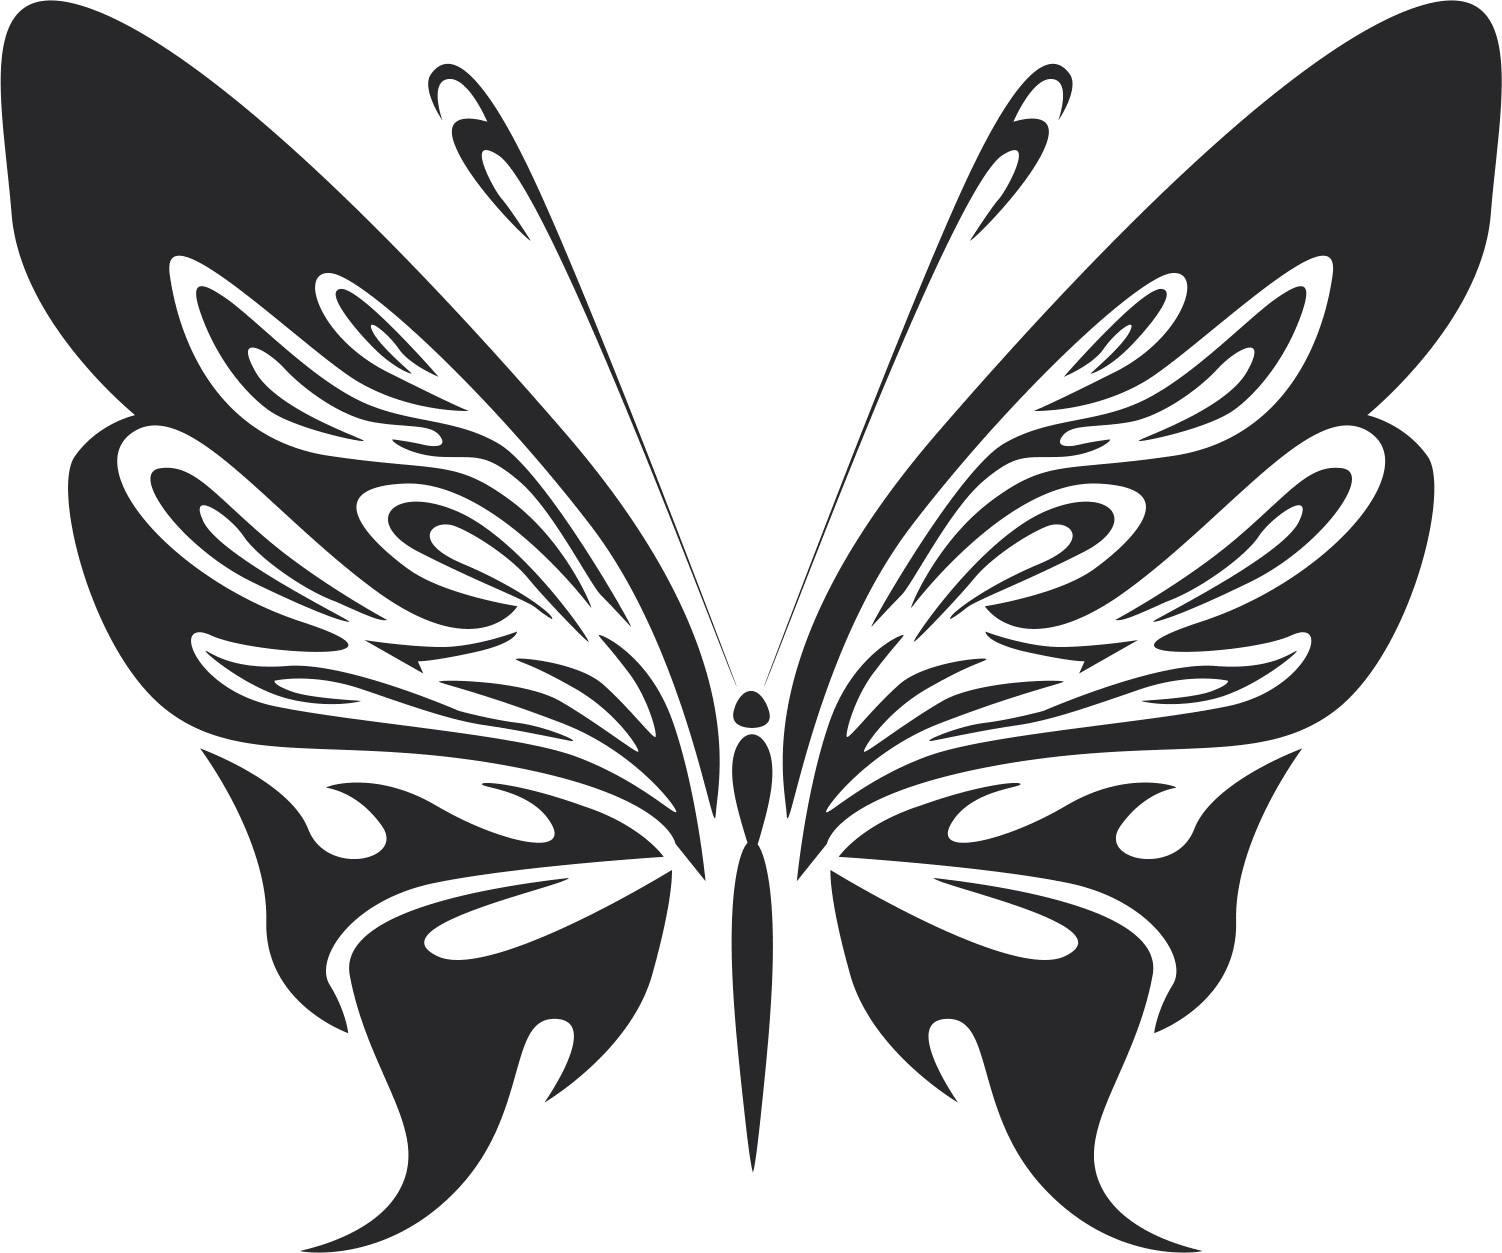 Tribal Butterfly Vector Art Tattoo Free DXF Vectors File